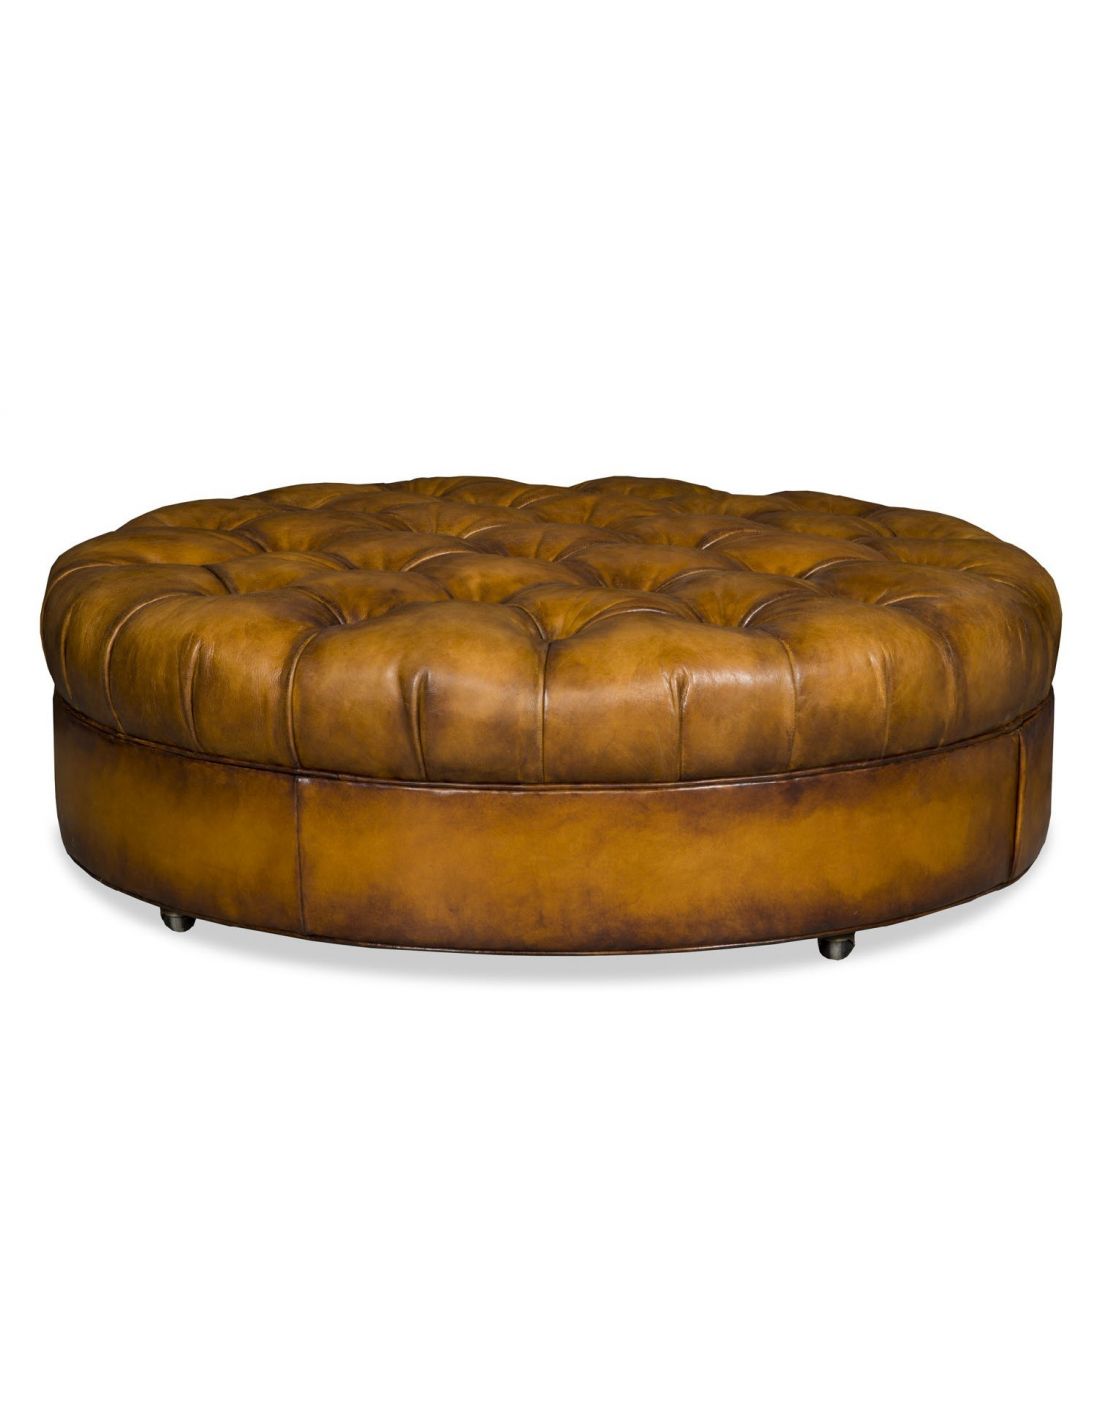 Round Leather Tufted Ottoman, Leather Ottoman Tufted